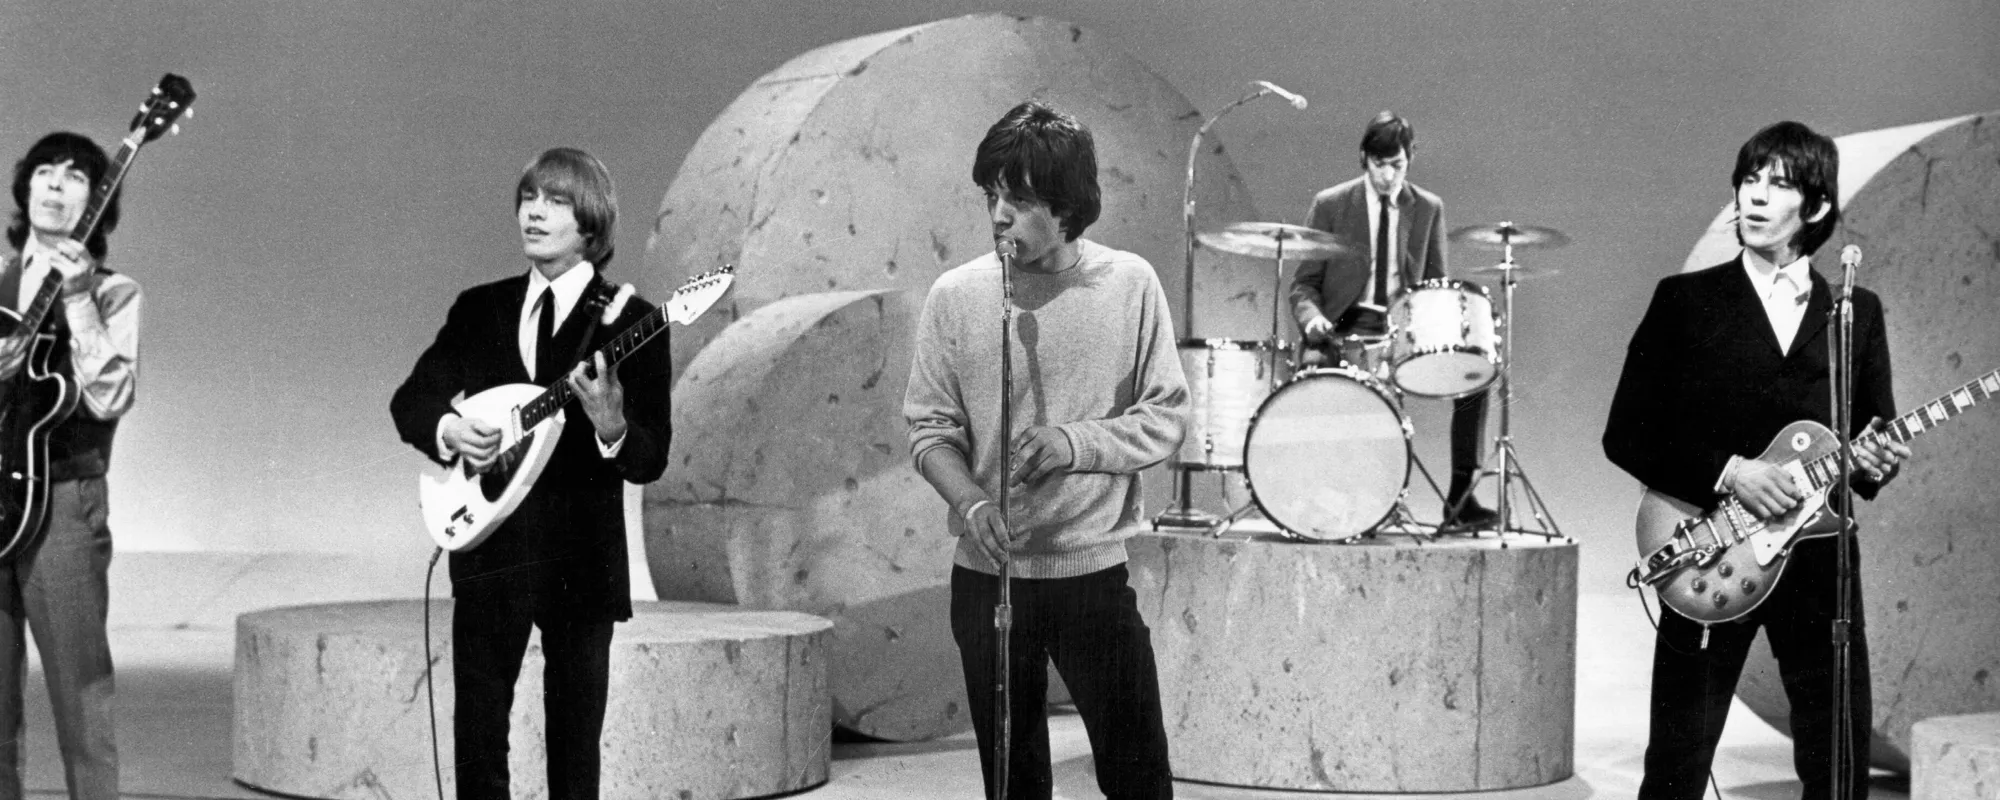 On This Day in Music History: The Rolling Stones Debut on ‘The Ed Sullivan Show’